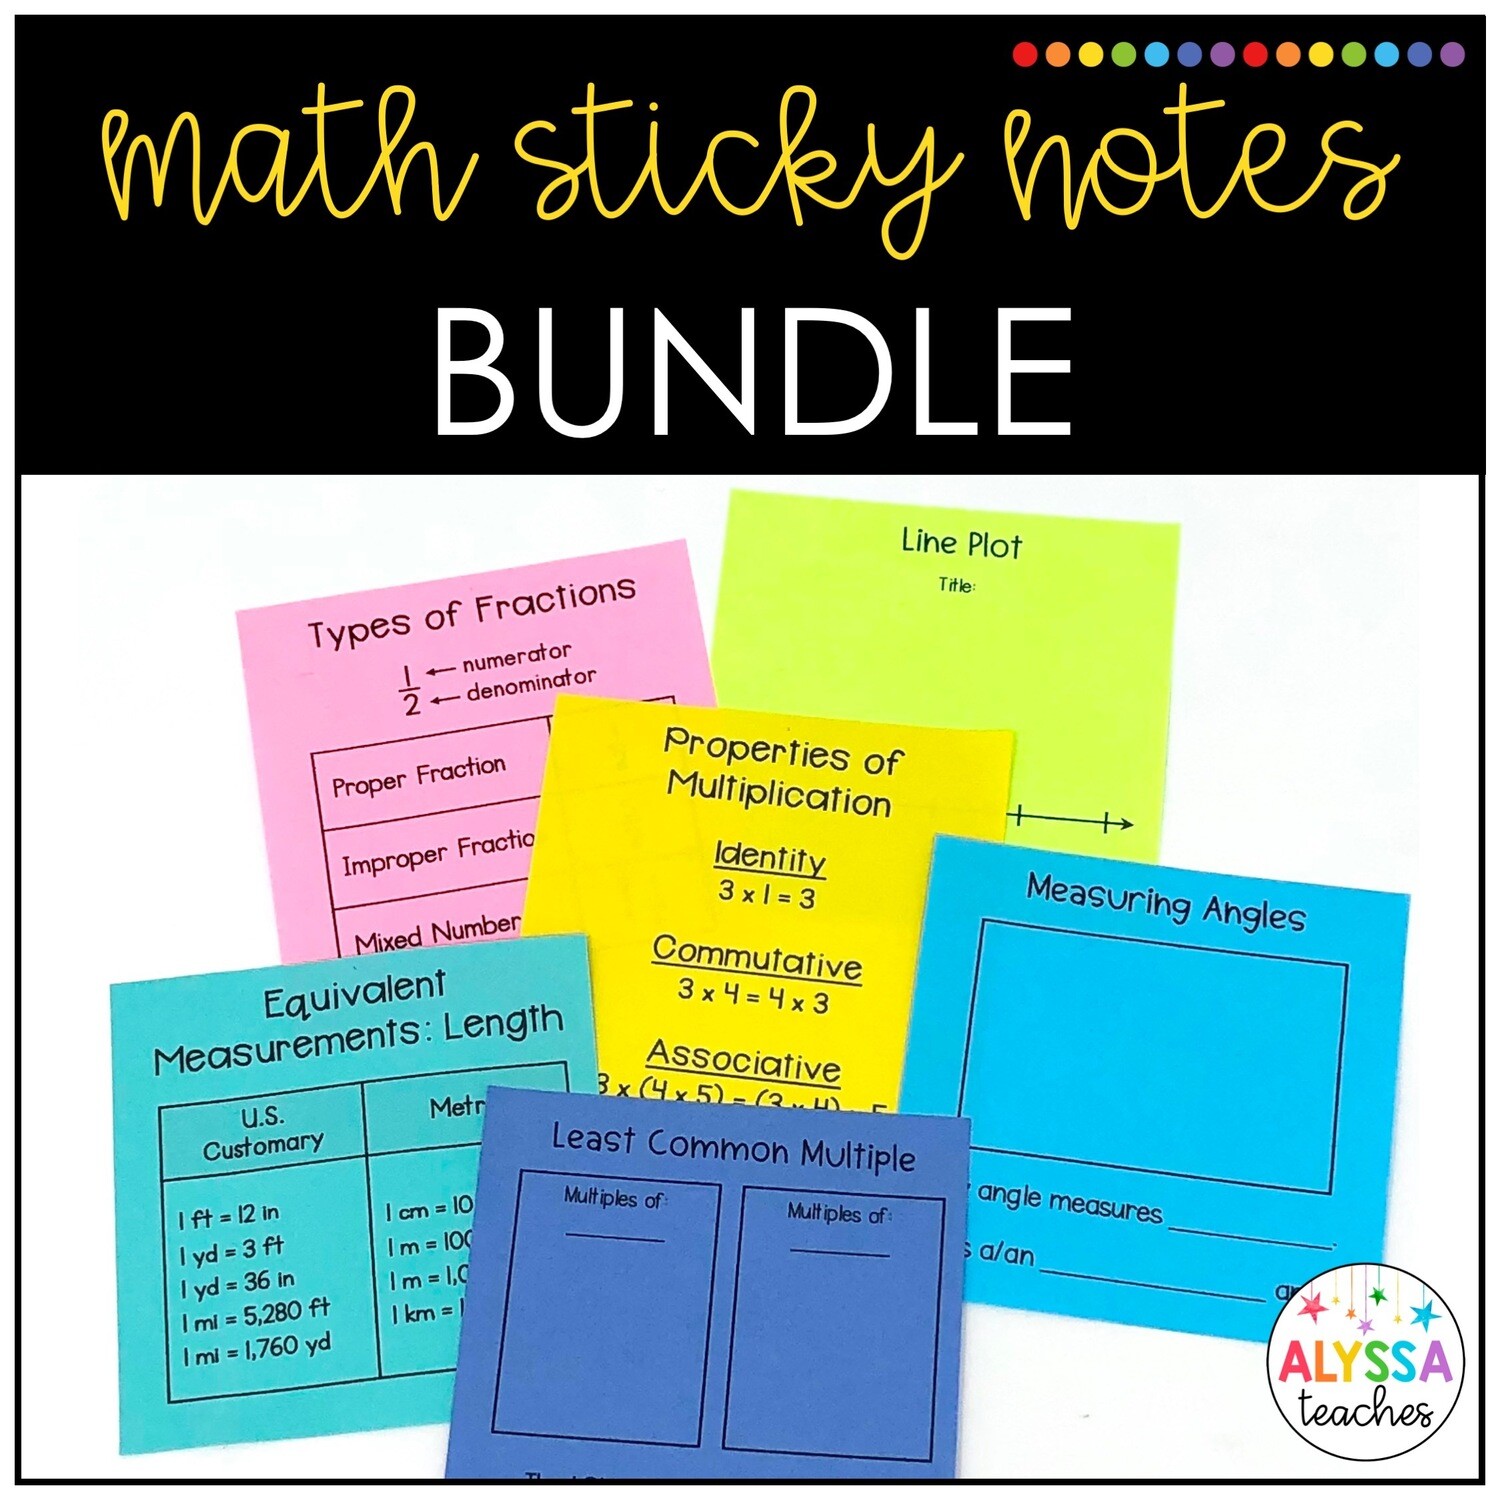 Printable Math Sticky Note Templates Bundle for Grades 3-5